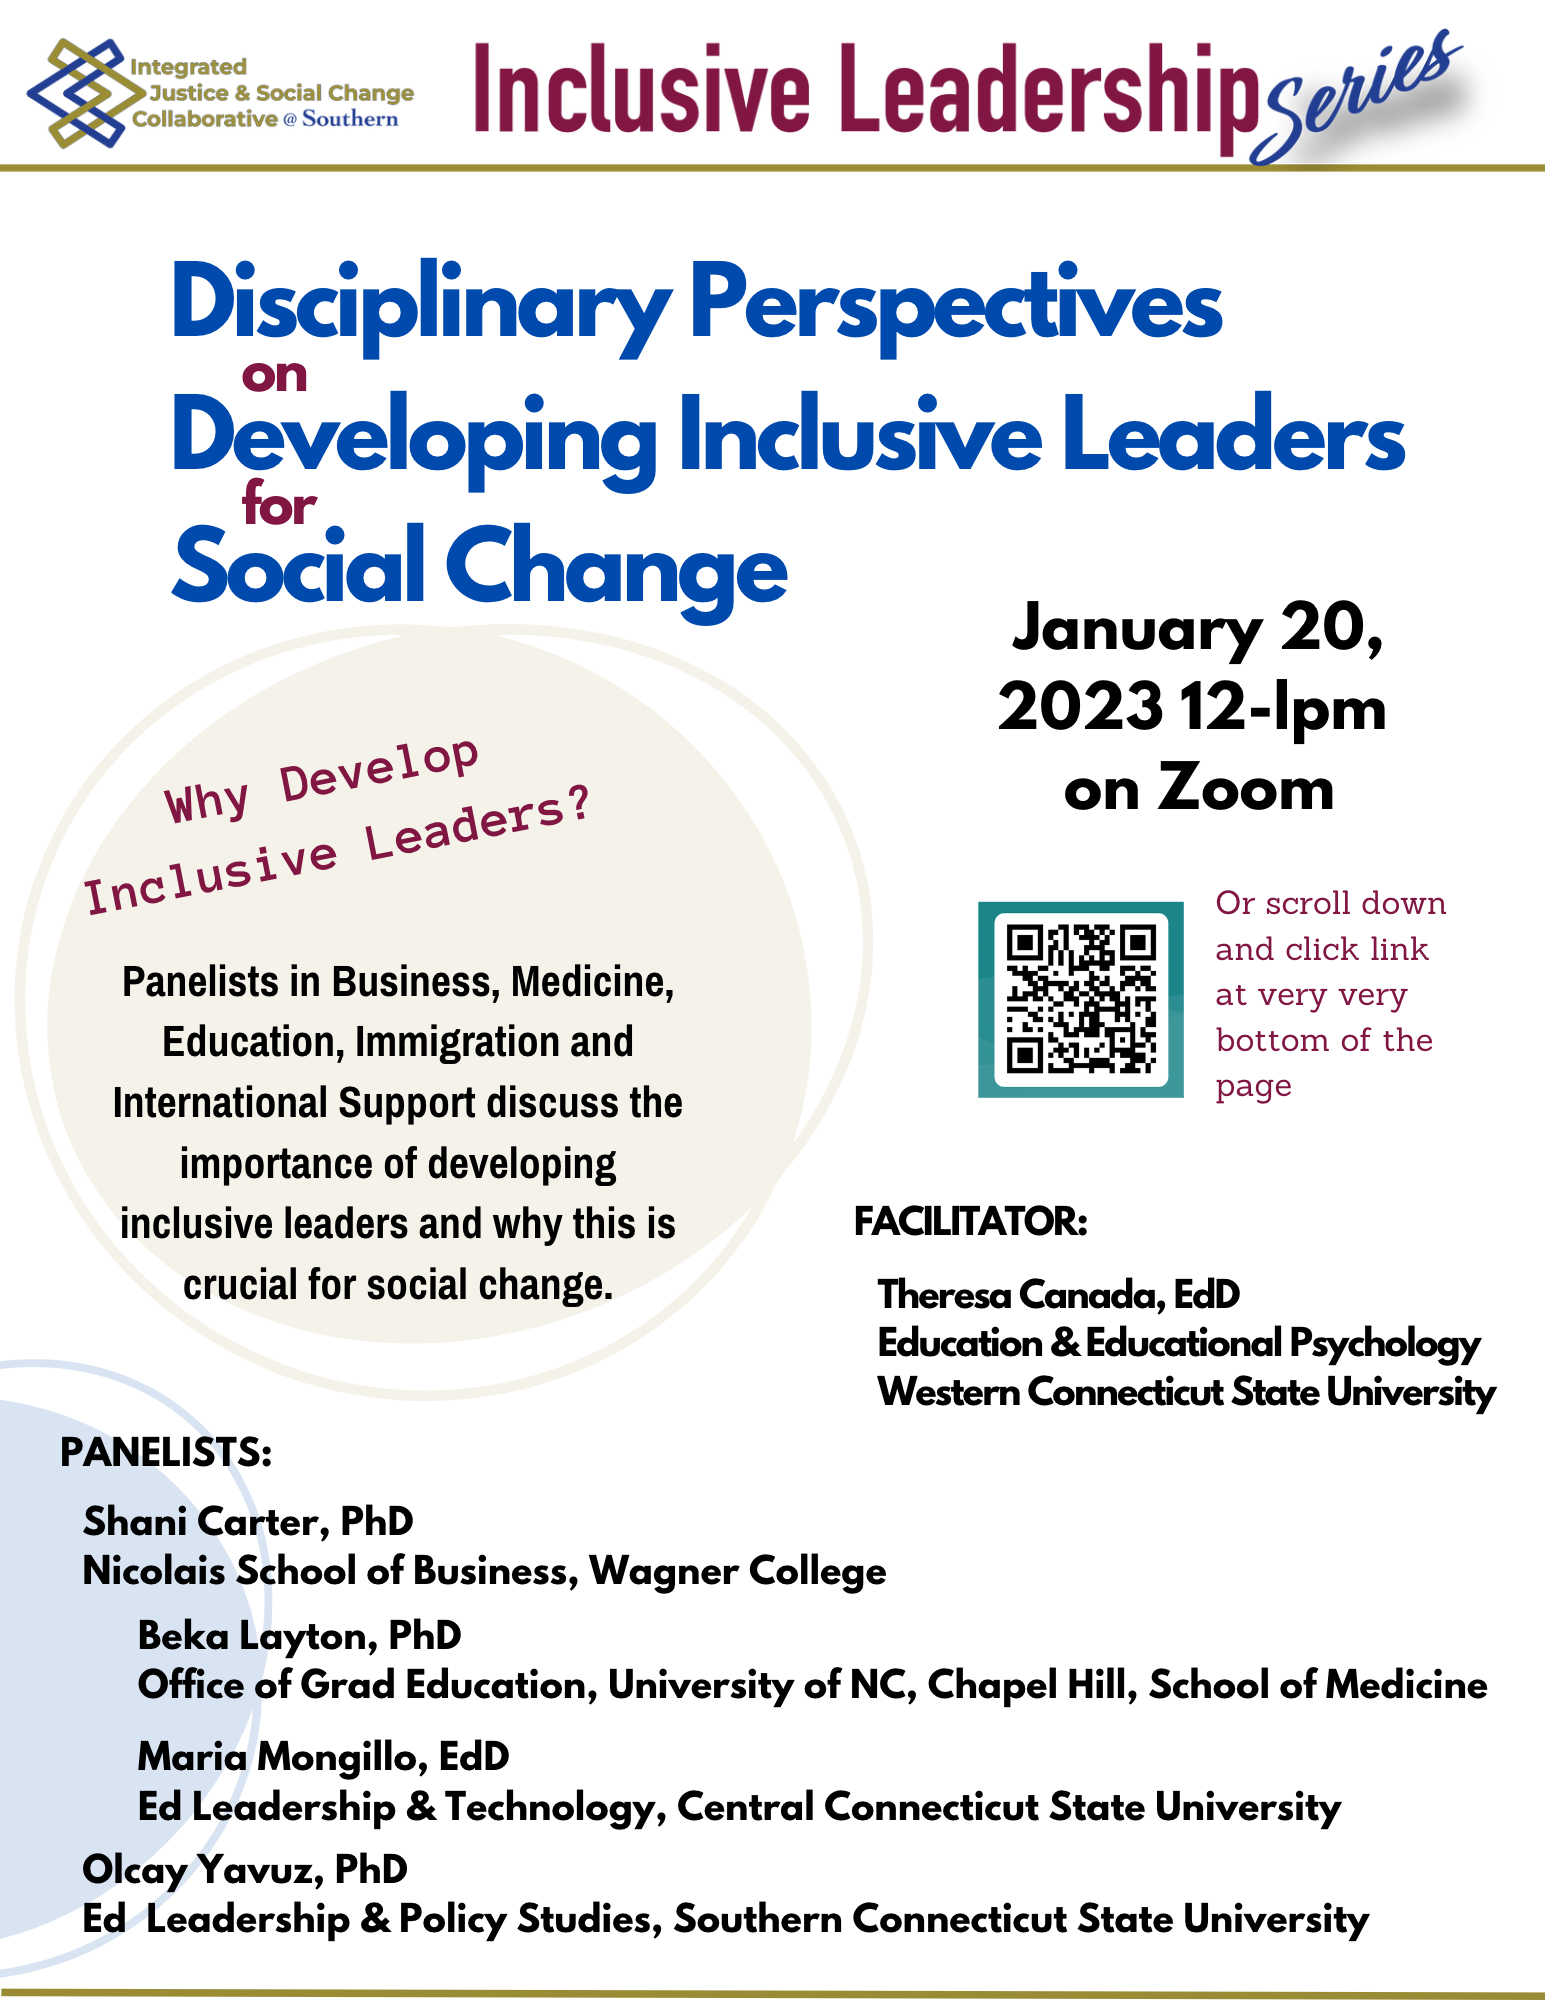 Flier advertising an Inclusive Leadership Event "Disciplinary Perspectives on Developing Inclusive Leaders for Social Change" jan 20, 2023 12-1pm Via Zoom click on the page for